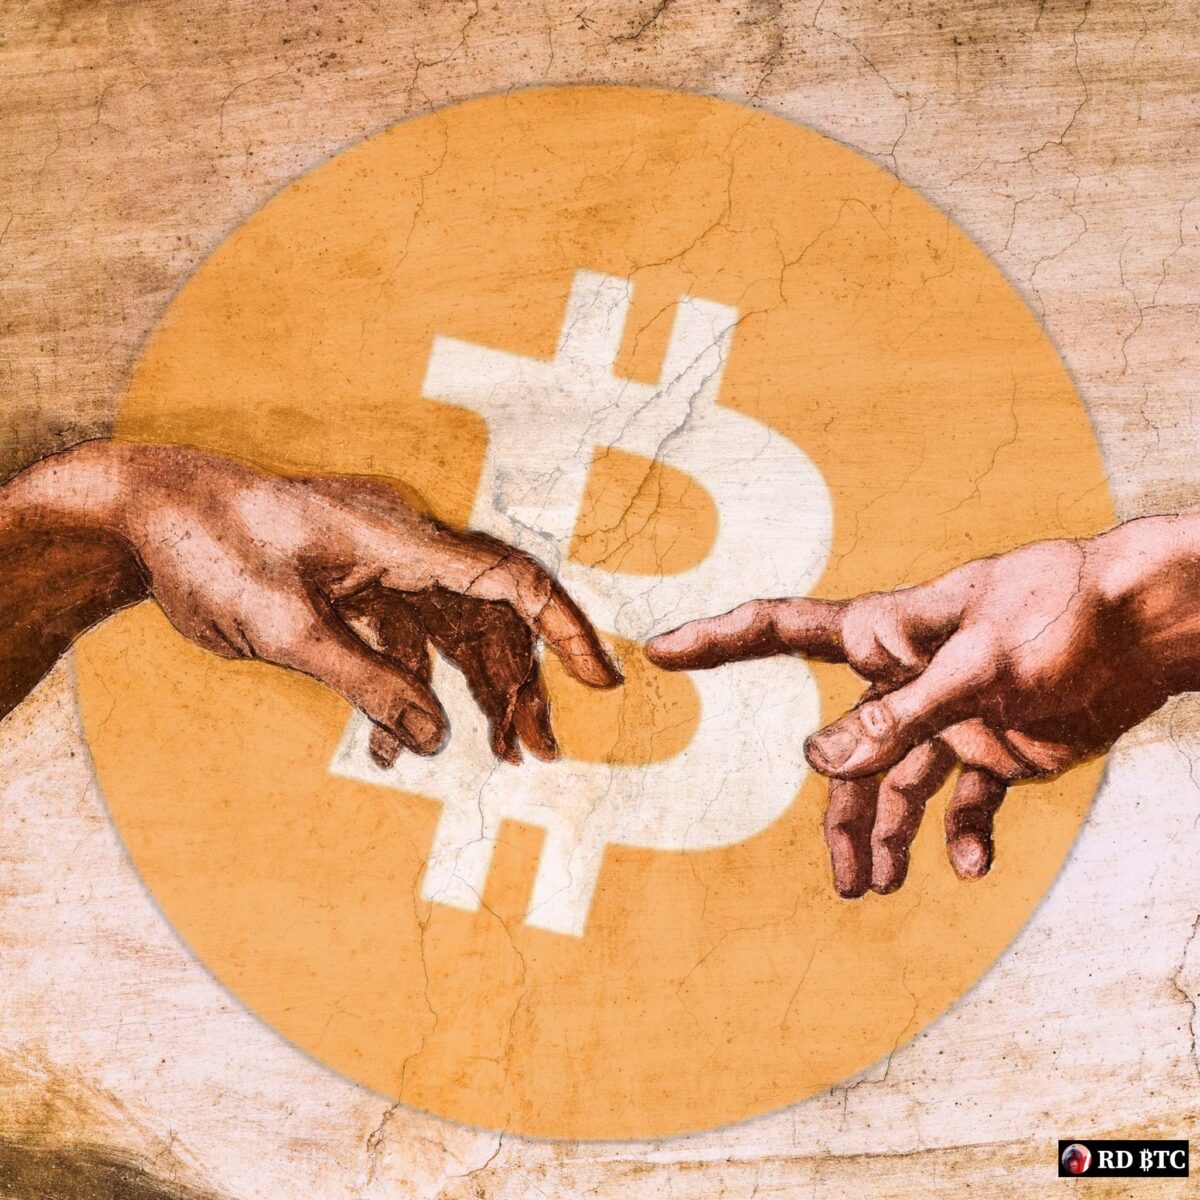 Blessed are the Bitcoiners, they shall inherit the Earth by Nozomi Hayase